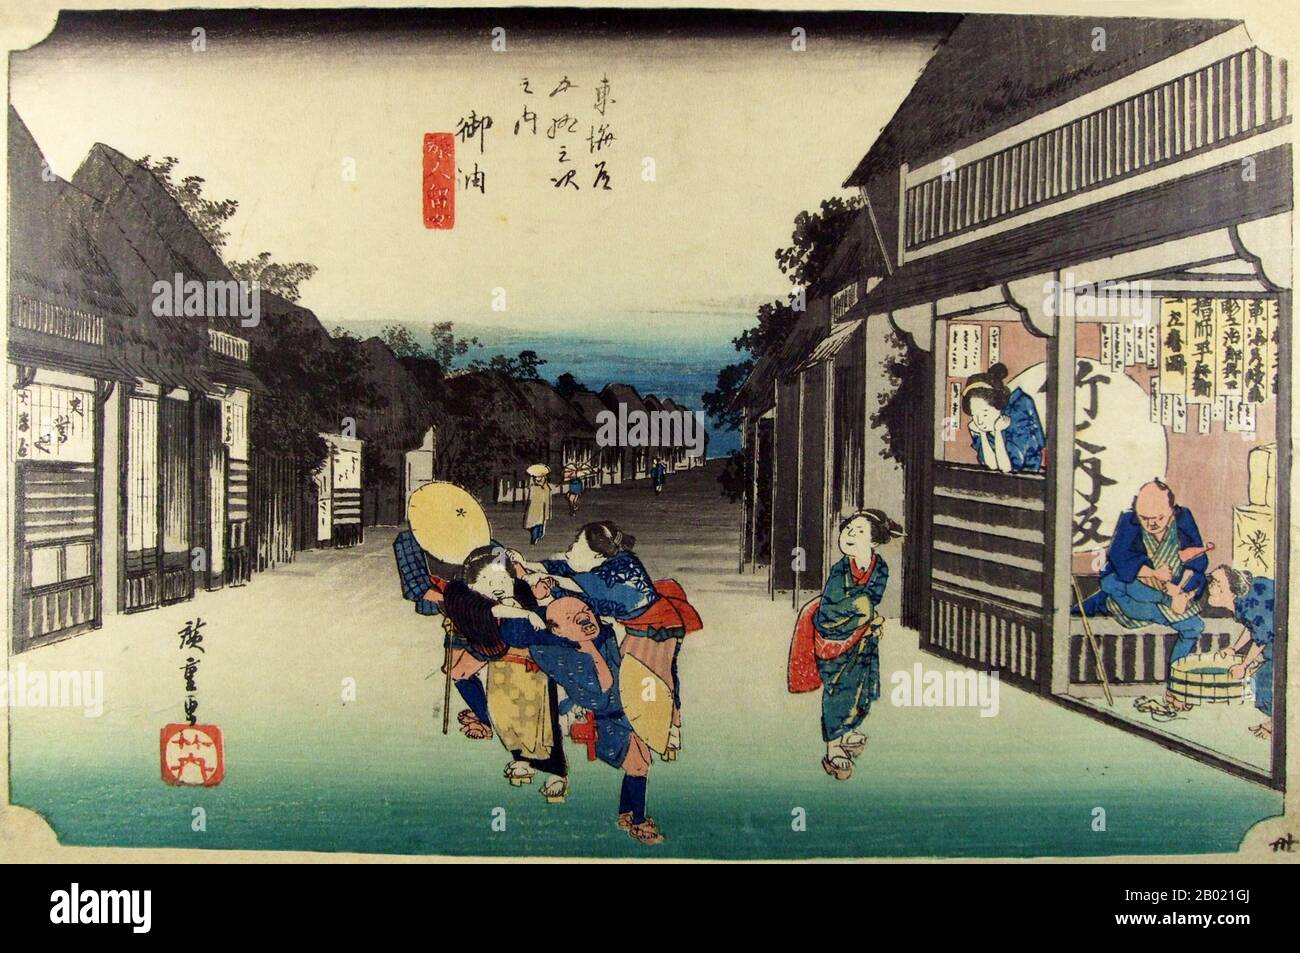 Goyu: Main street of the village at nightfall and female touts dragging travellers into the teahouse on the right, where one is already resting. The large circle on the wall bears the sign of the publisher of the series, Take-no-Uchi. On the signboard inside are given the names of the engraver, Jirobei; the printer, Heibei; and the artist, Ichiryusai. This station was lined with many inns and restaurants. The waitresses were renowned for their persistence in trying to entice customers into their shops.  Utagawa Hiroshige (歌川 広重, 1797 – October 12, 1858) was a Japanese ukiyo-e artist, and one o Stock Photo